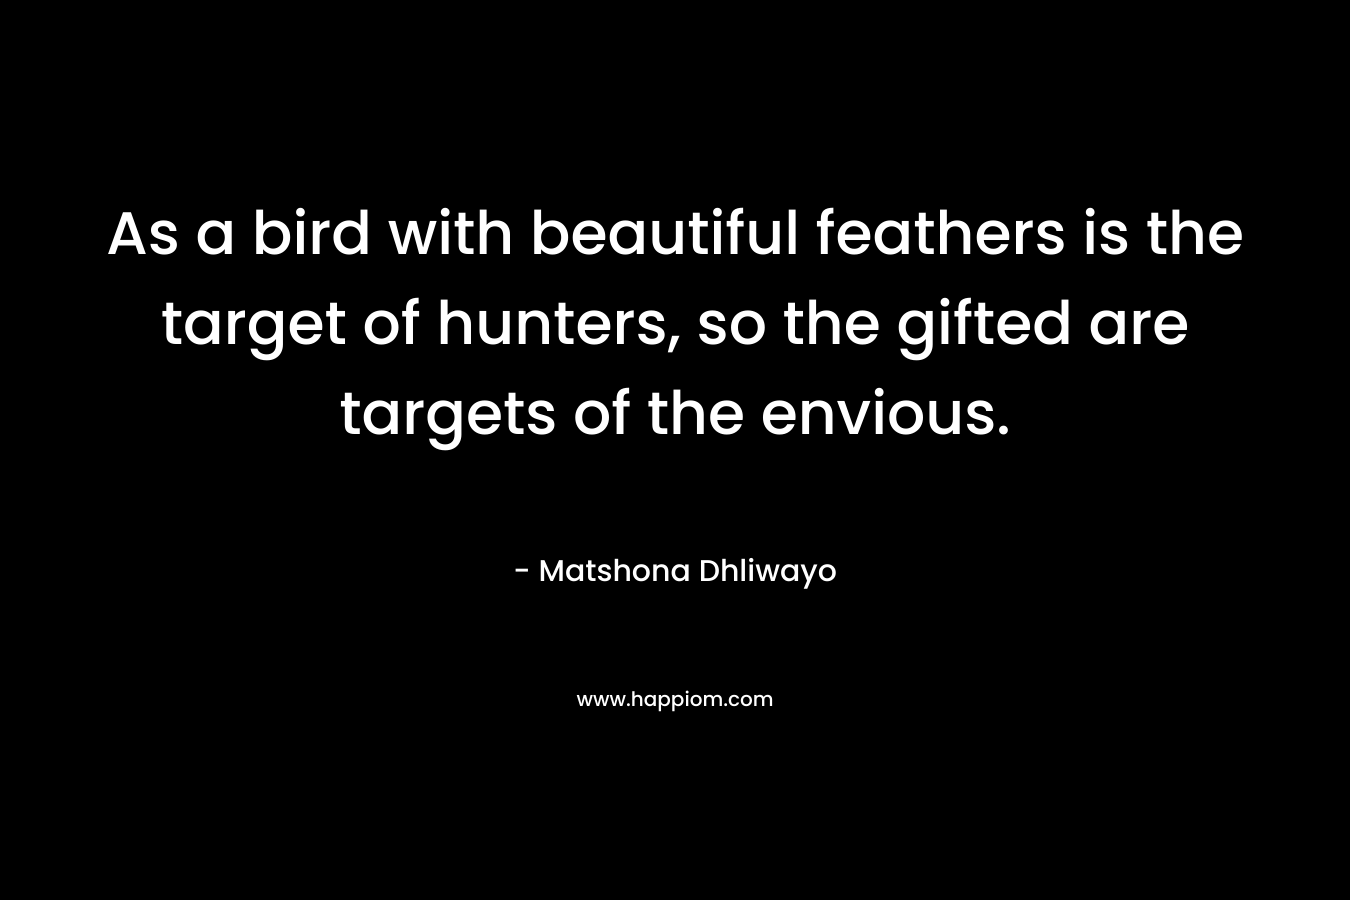 As a bird with beautiful feathers is the target of hunters, so the gifted are targets of the envious.